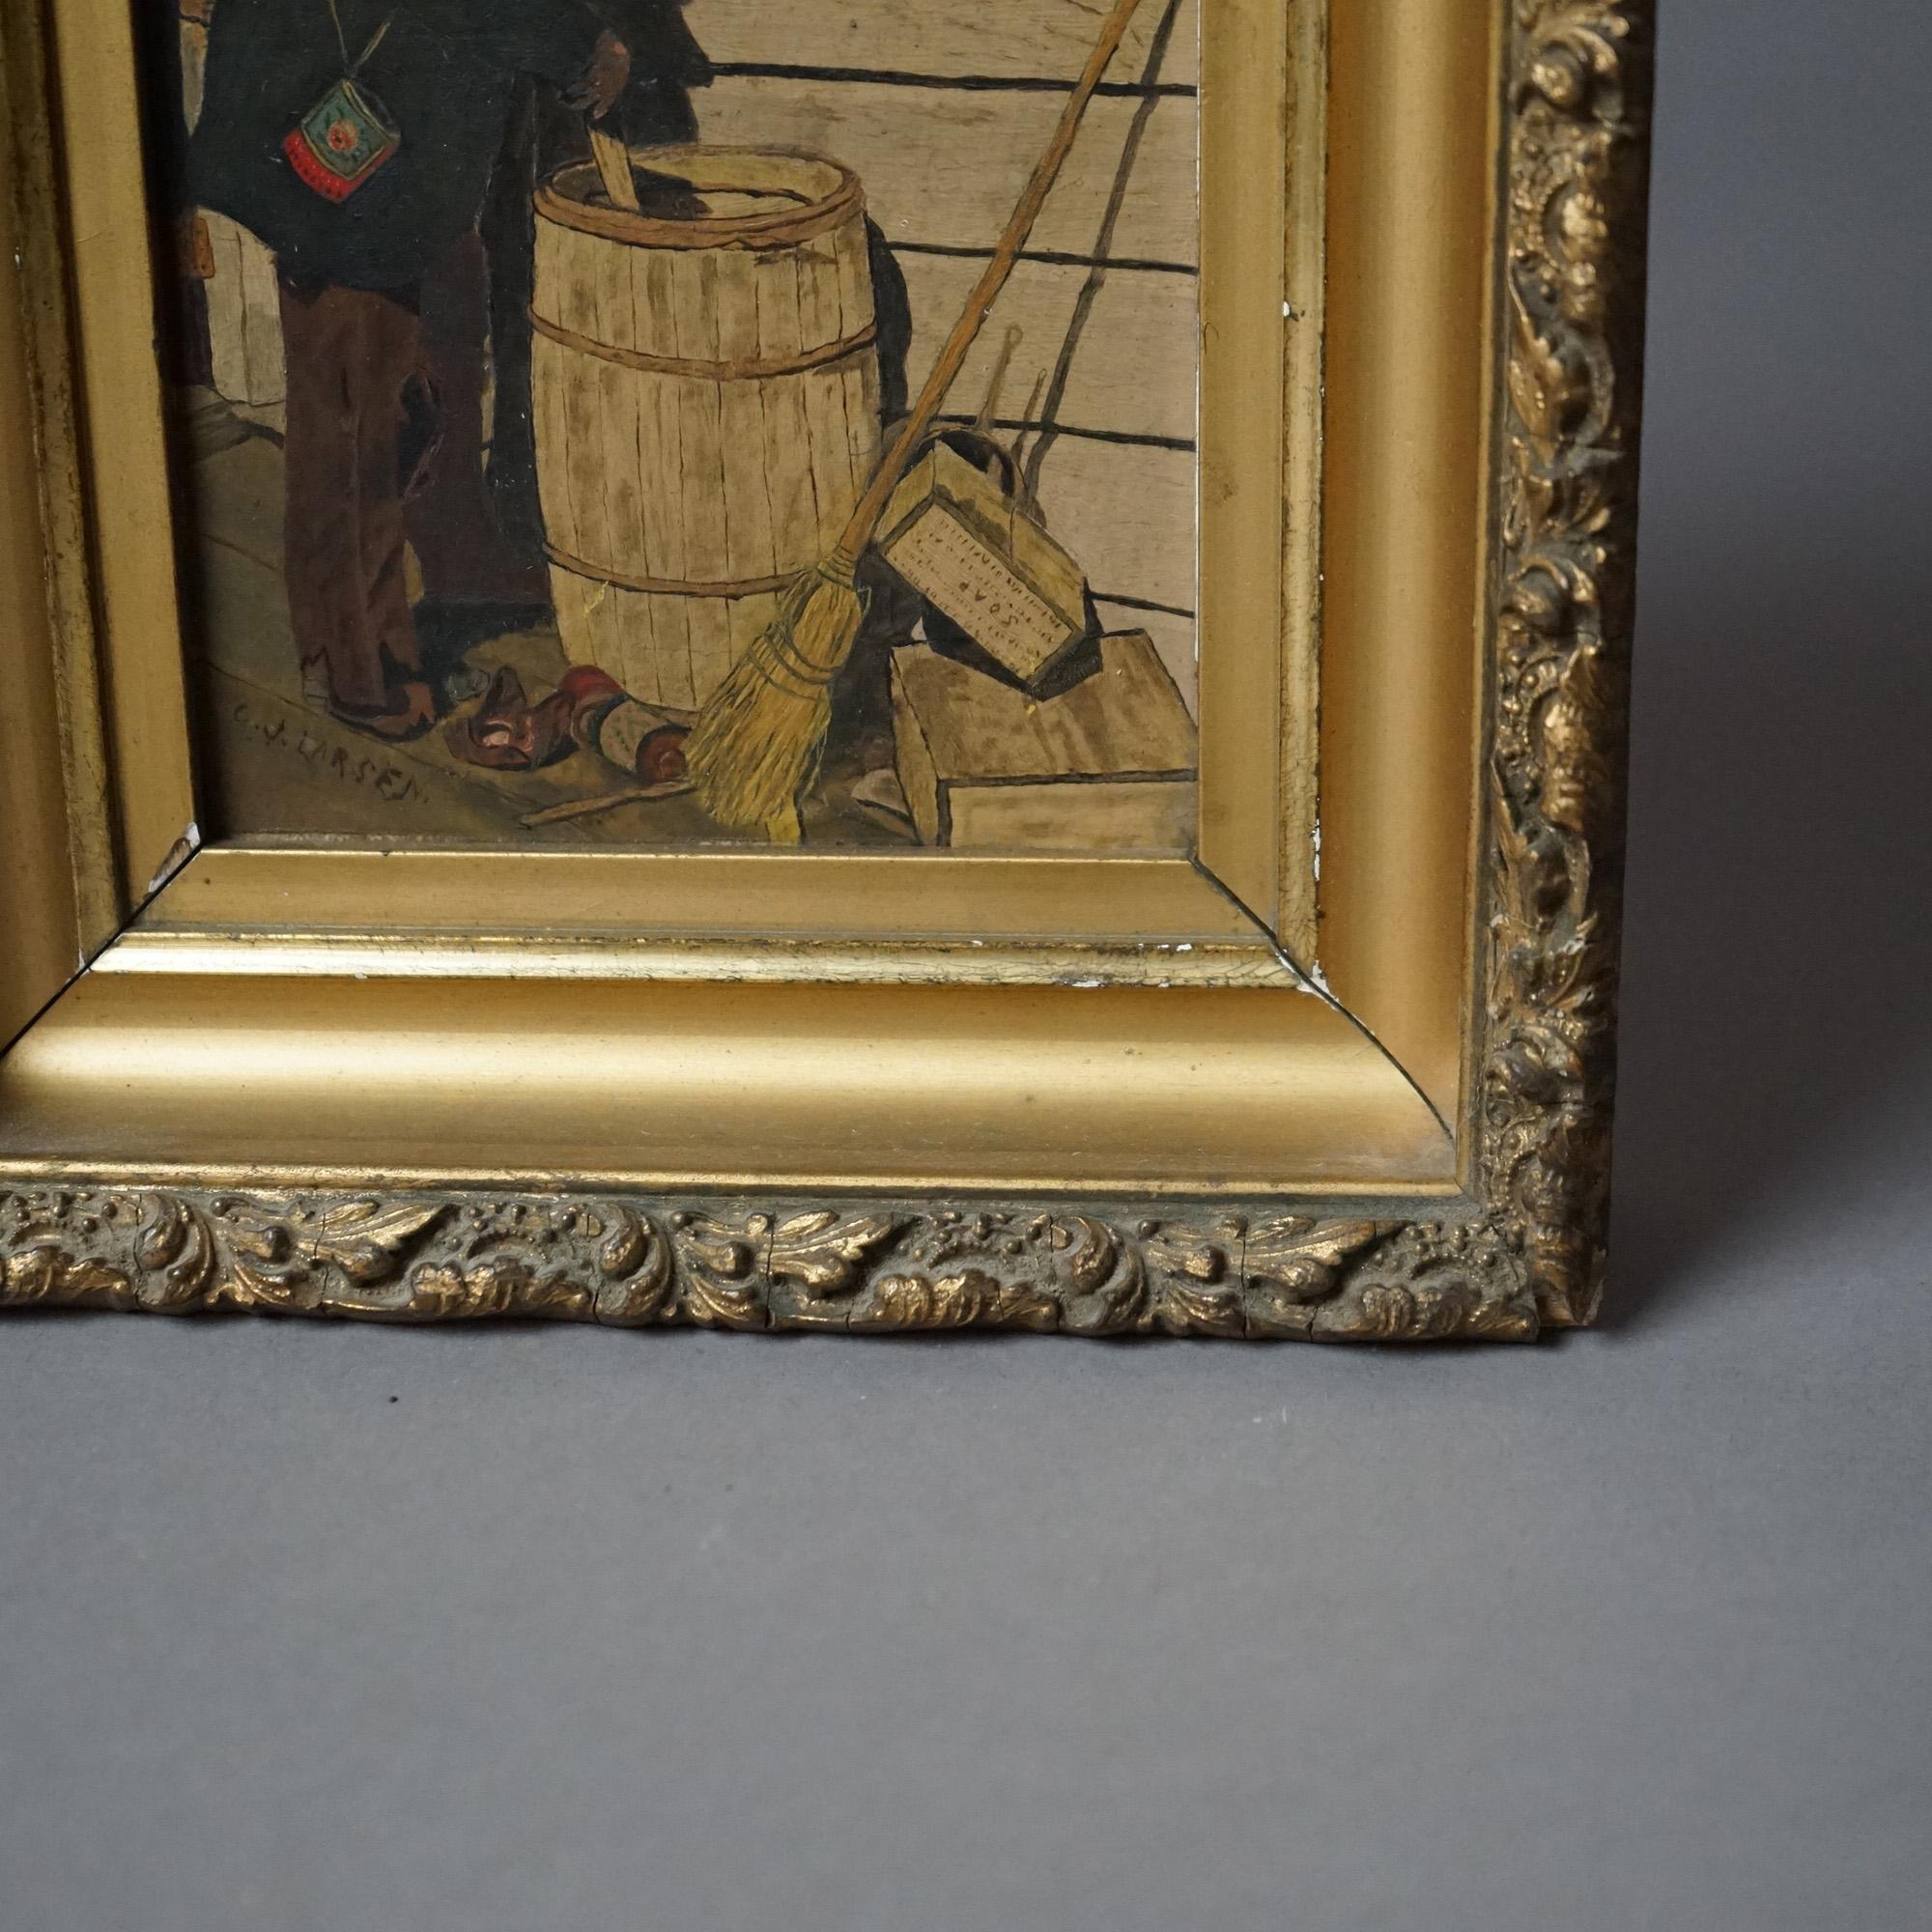 Wood Antique Oil on Panel Painting of a Street Urchin Hobo Signed C.J. Larsen C1900 For Sale